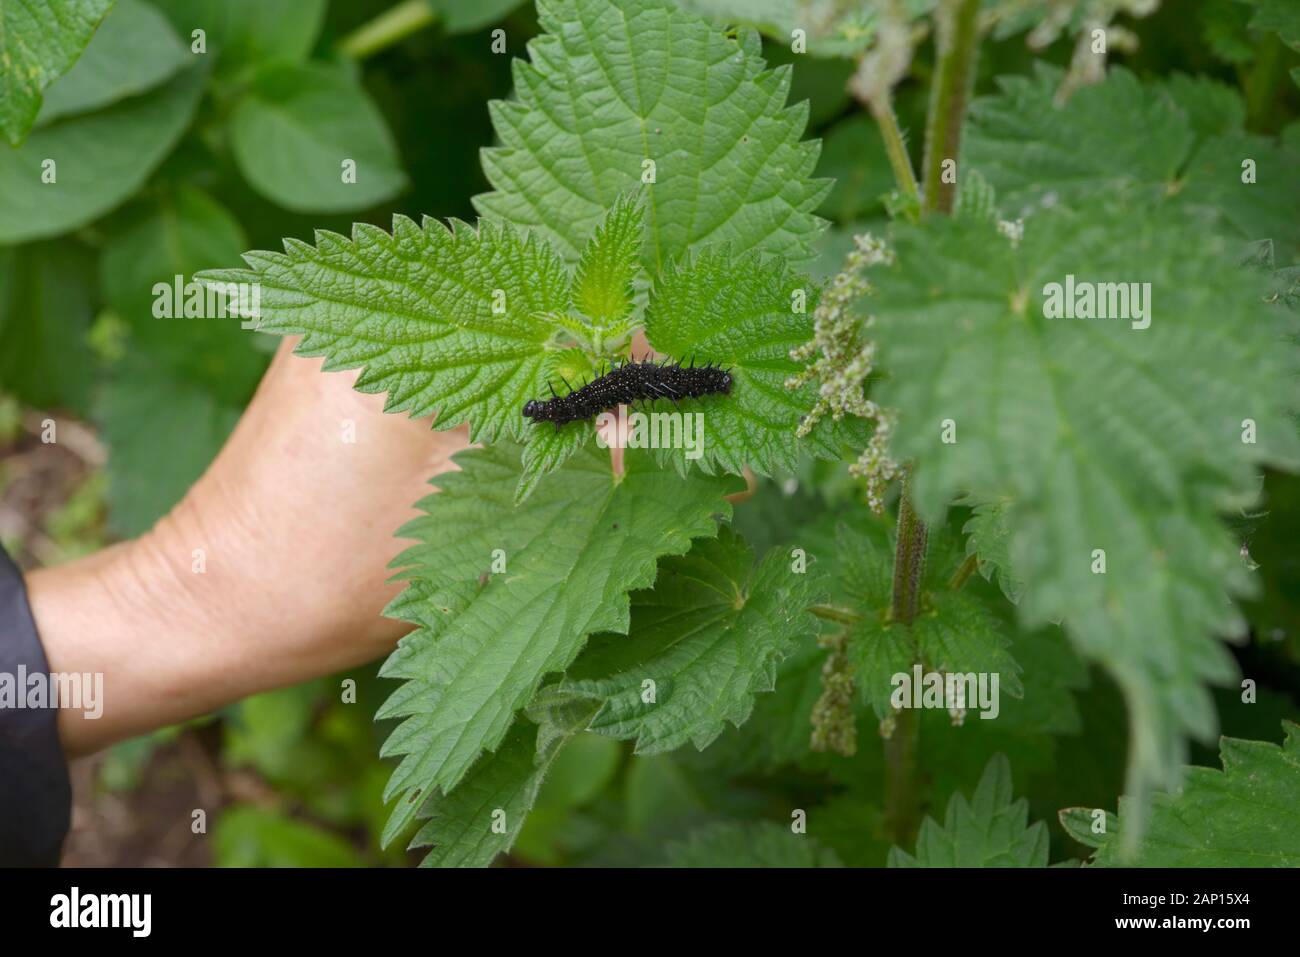 Inachis io, Peacock butterfly caterpillar feeding on Nettle, Urtica dioica leaves, Wales, UK. Stock Photo